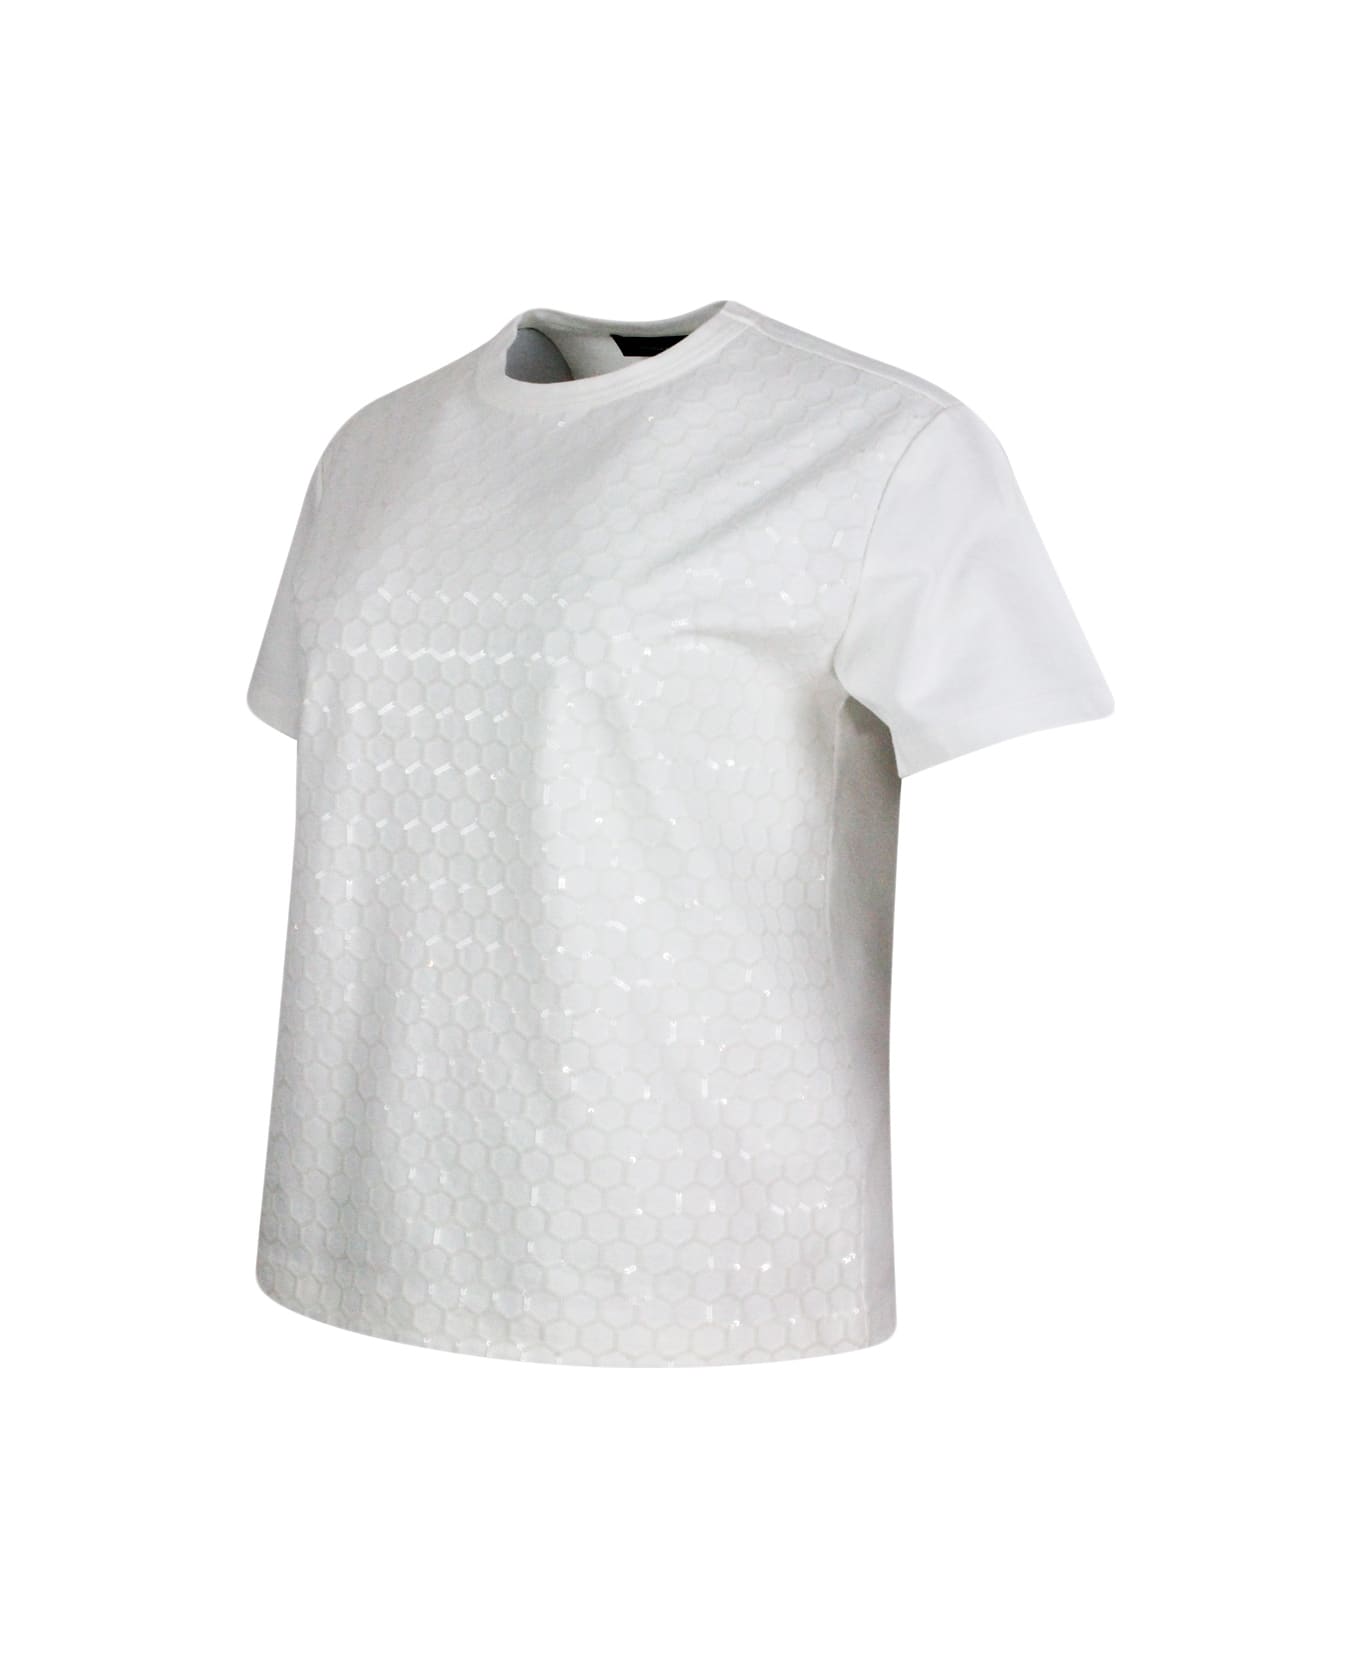 Fabiana Filippi Crew-neck, Short-sleeved T-shirt Made Of Soft Cotton Embellished With Sequin Applications That Give A Three-dimensional Effect To The Garment. - White Tシャツ